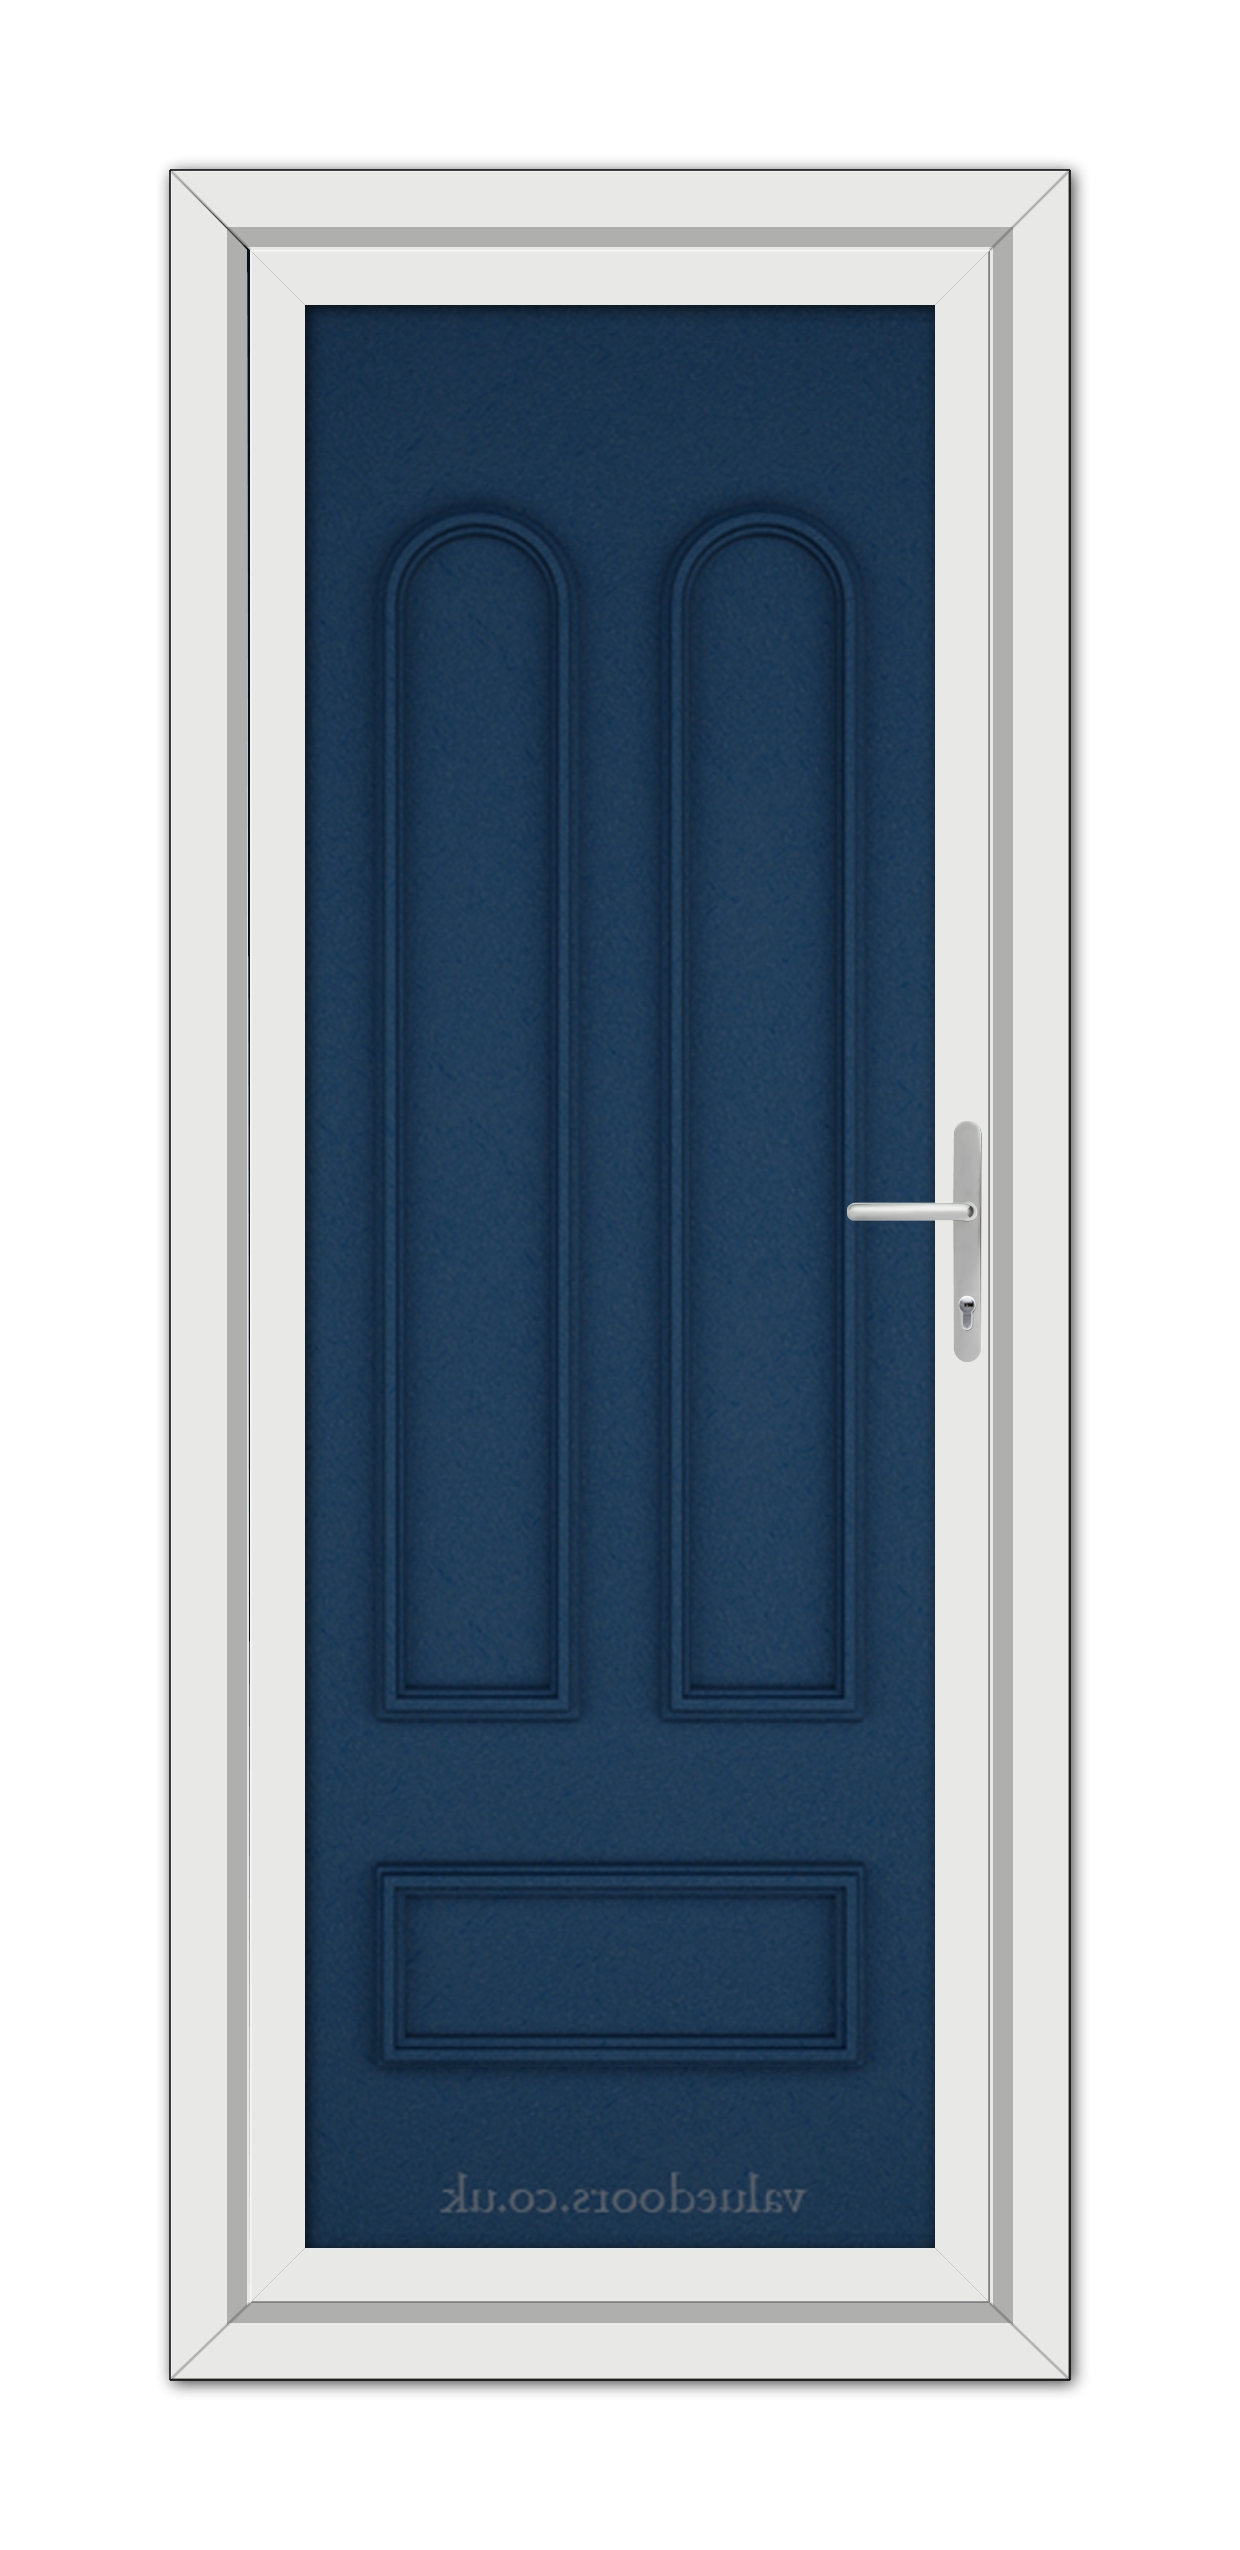 A vertical image of a closed Blue Madrid Solid uPVC Door with a silver handle, set within a white frame.